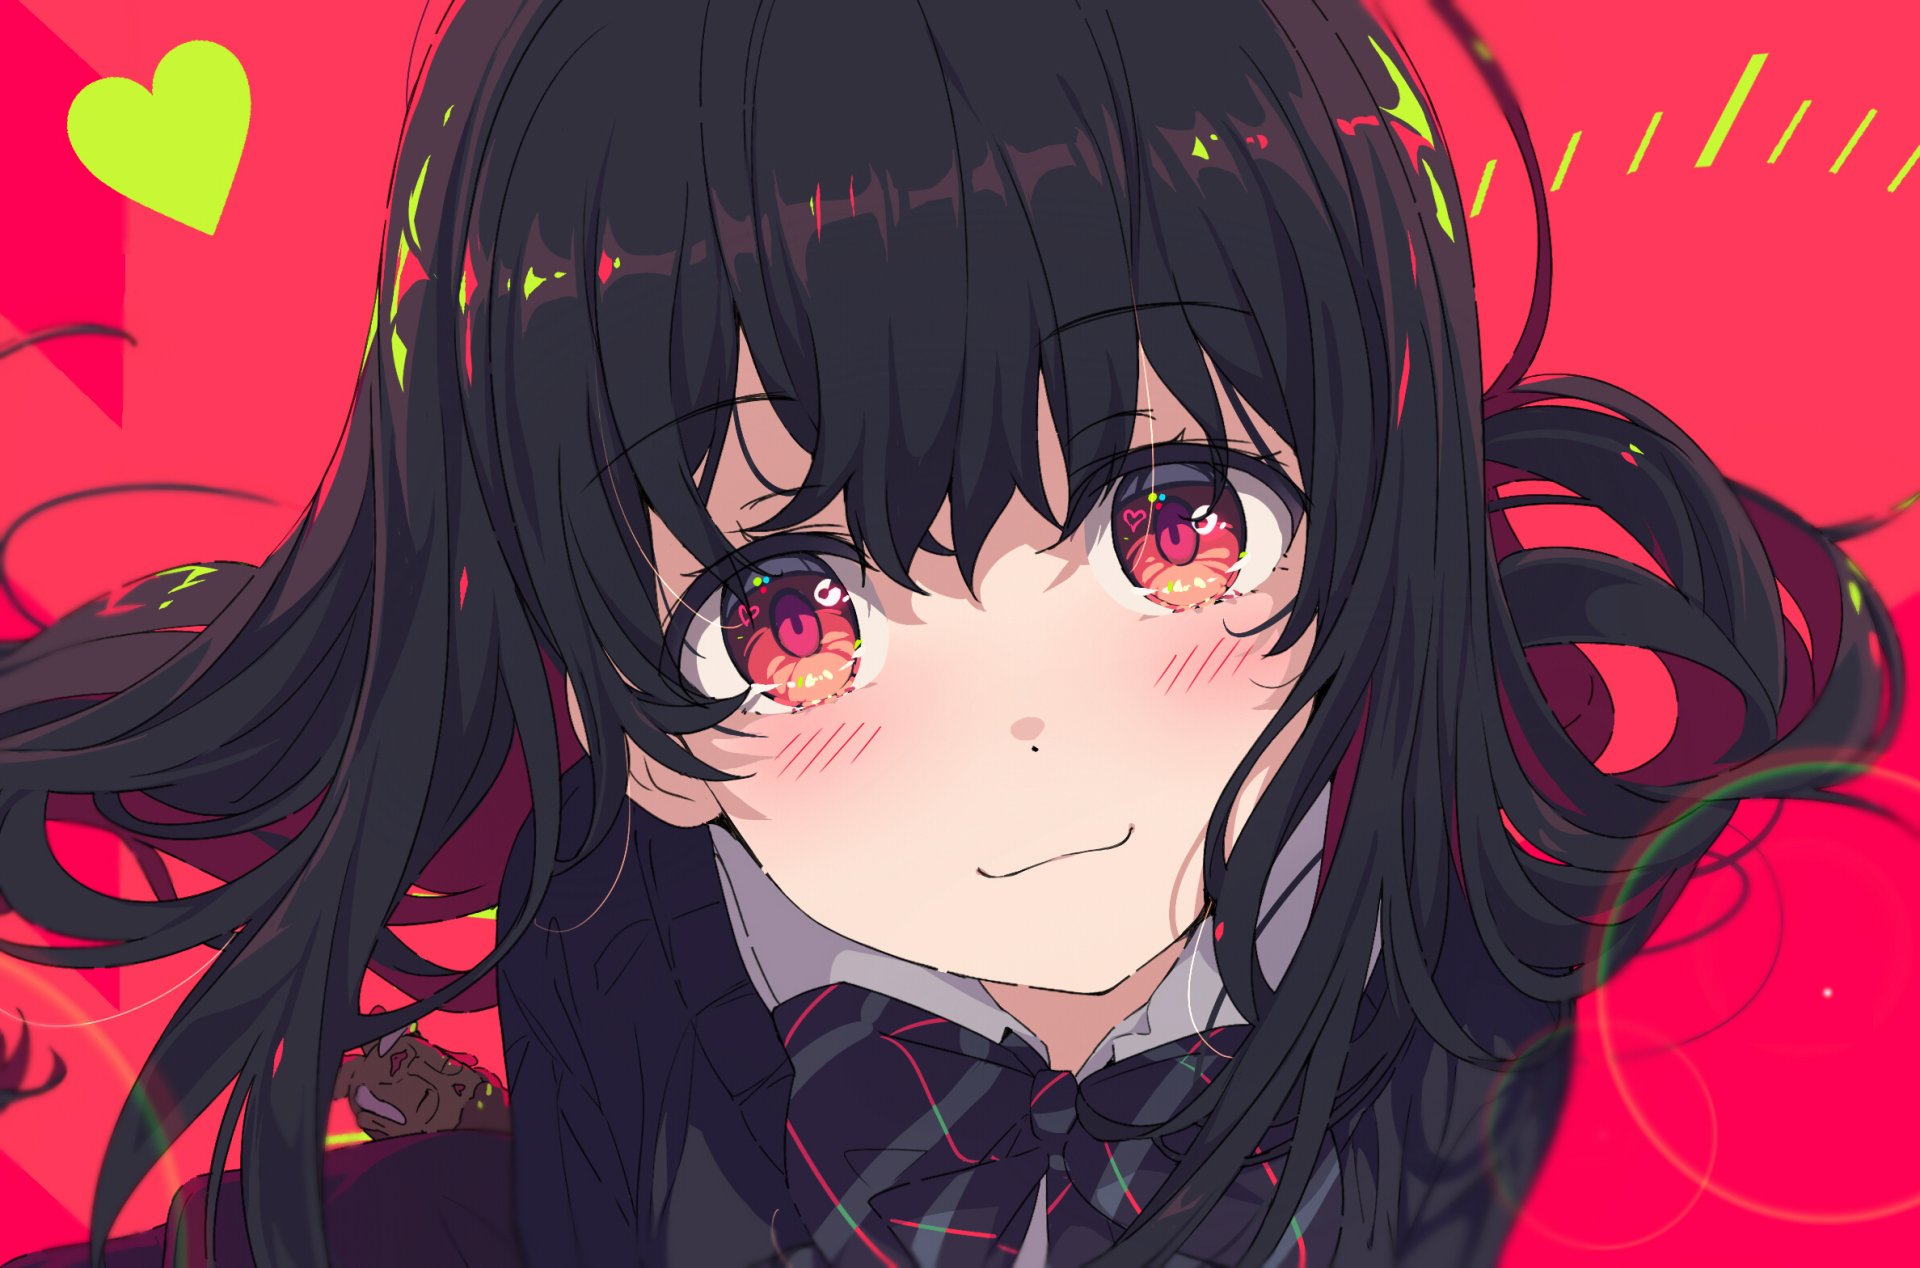 A beautiful anime girl with black hair and a rosy blush on her face, depicted in a high-definition desktop wallpaper background.